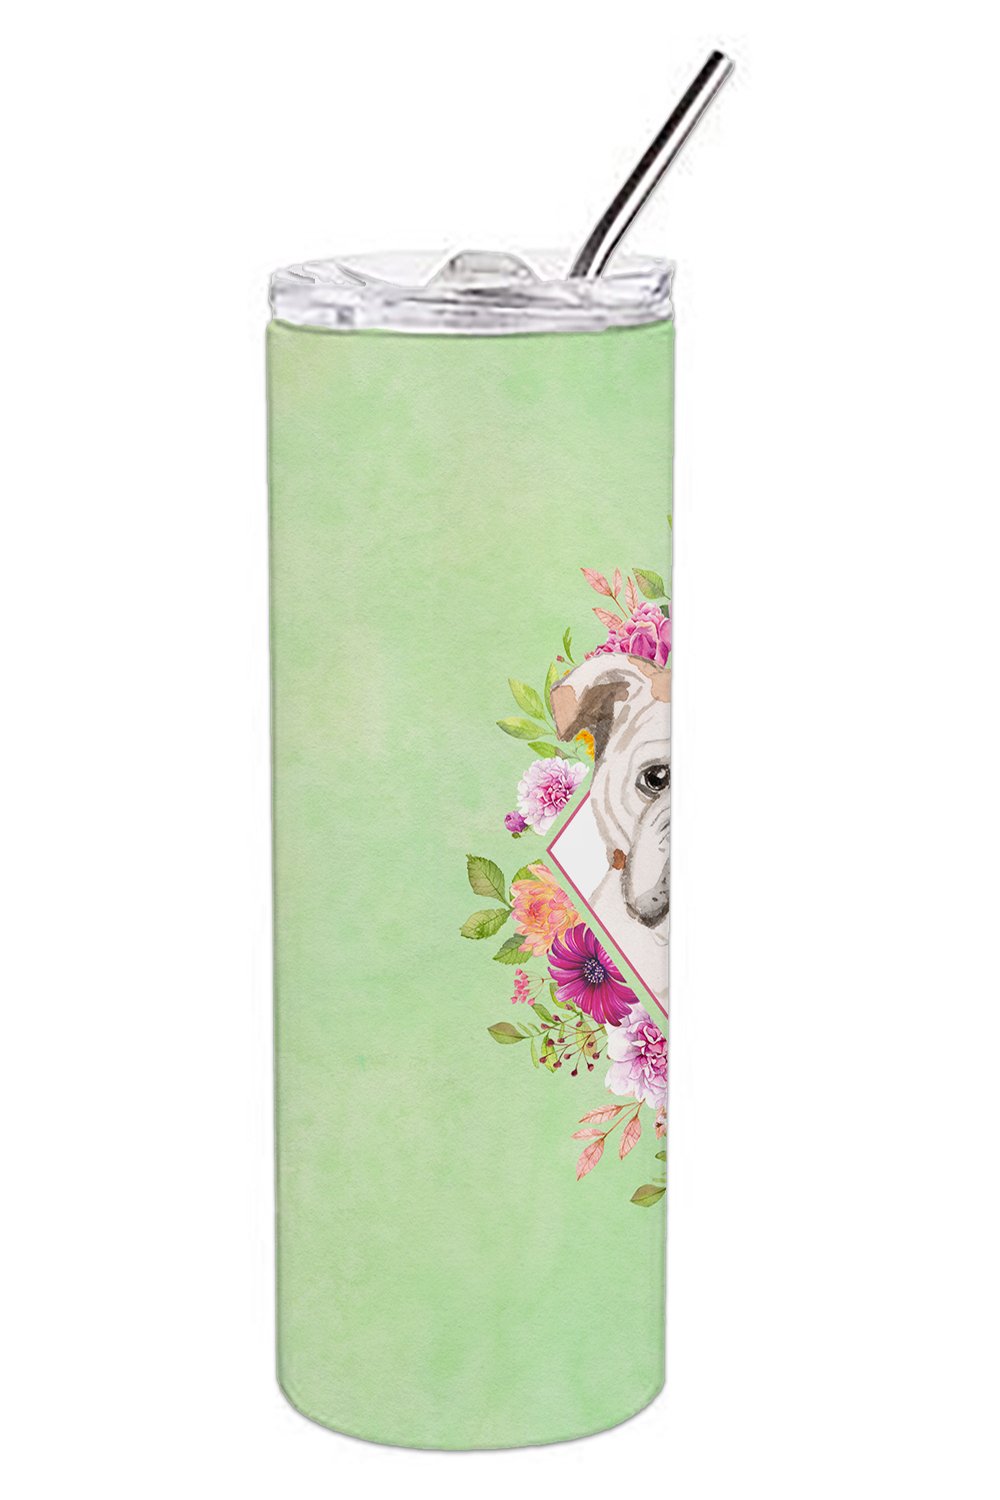 English Bulldog Green Flowers Double Walled Stainless Steel 20 oz Skinny Tumbler CK4400TBL20 by Caroline's Treasures